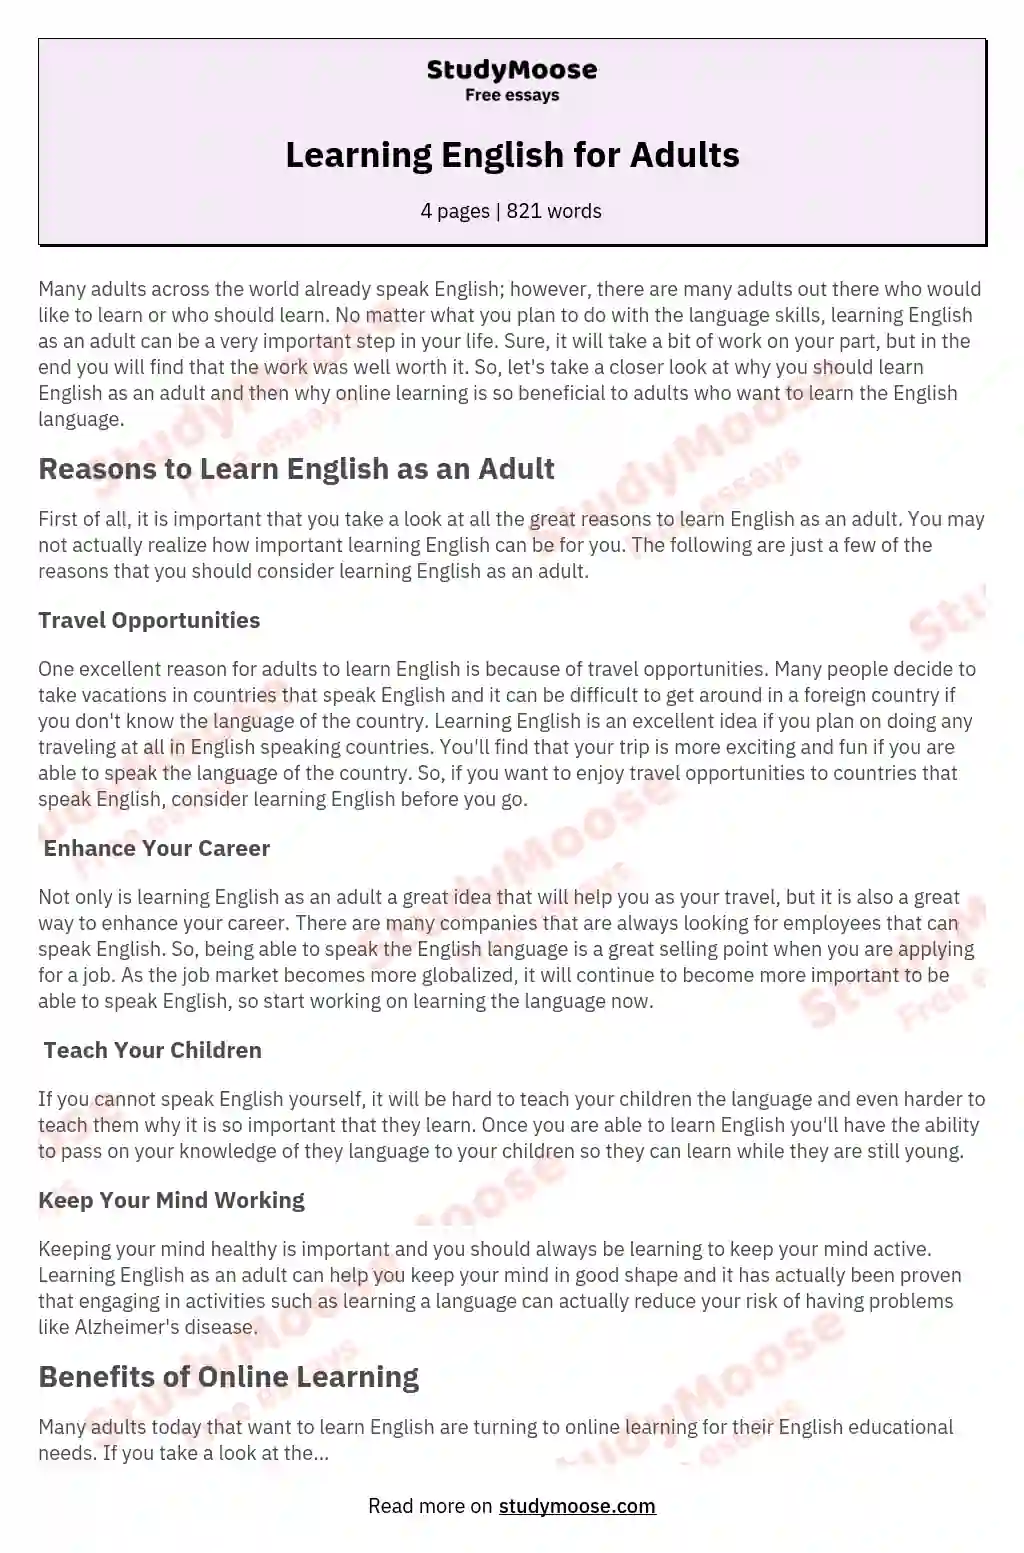 Learning English for Adults essay